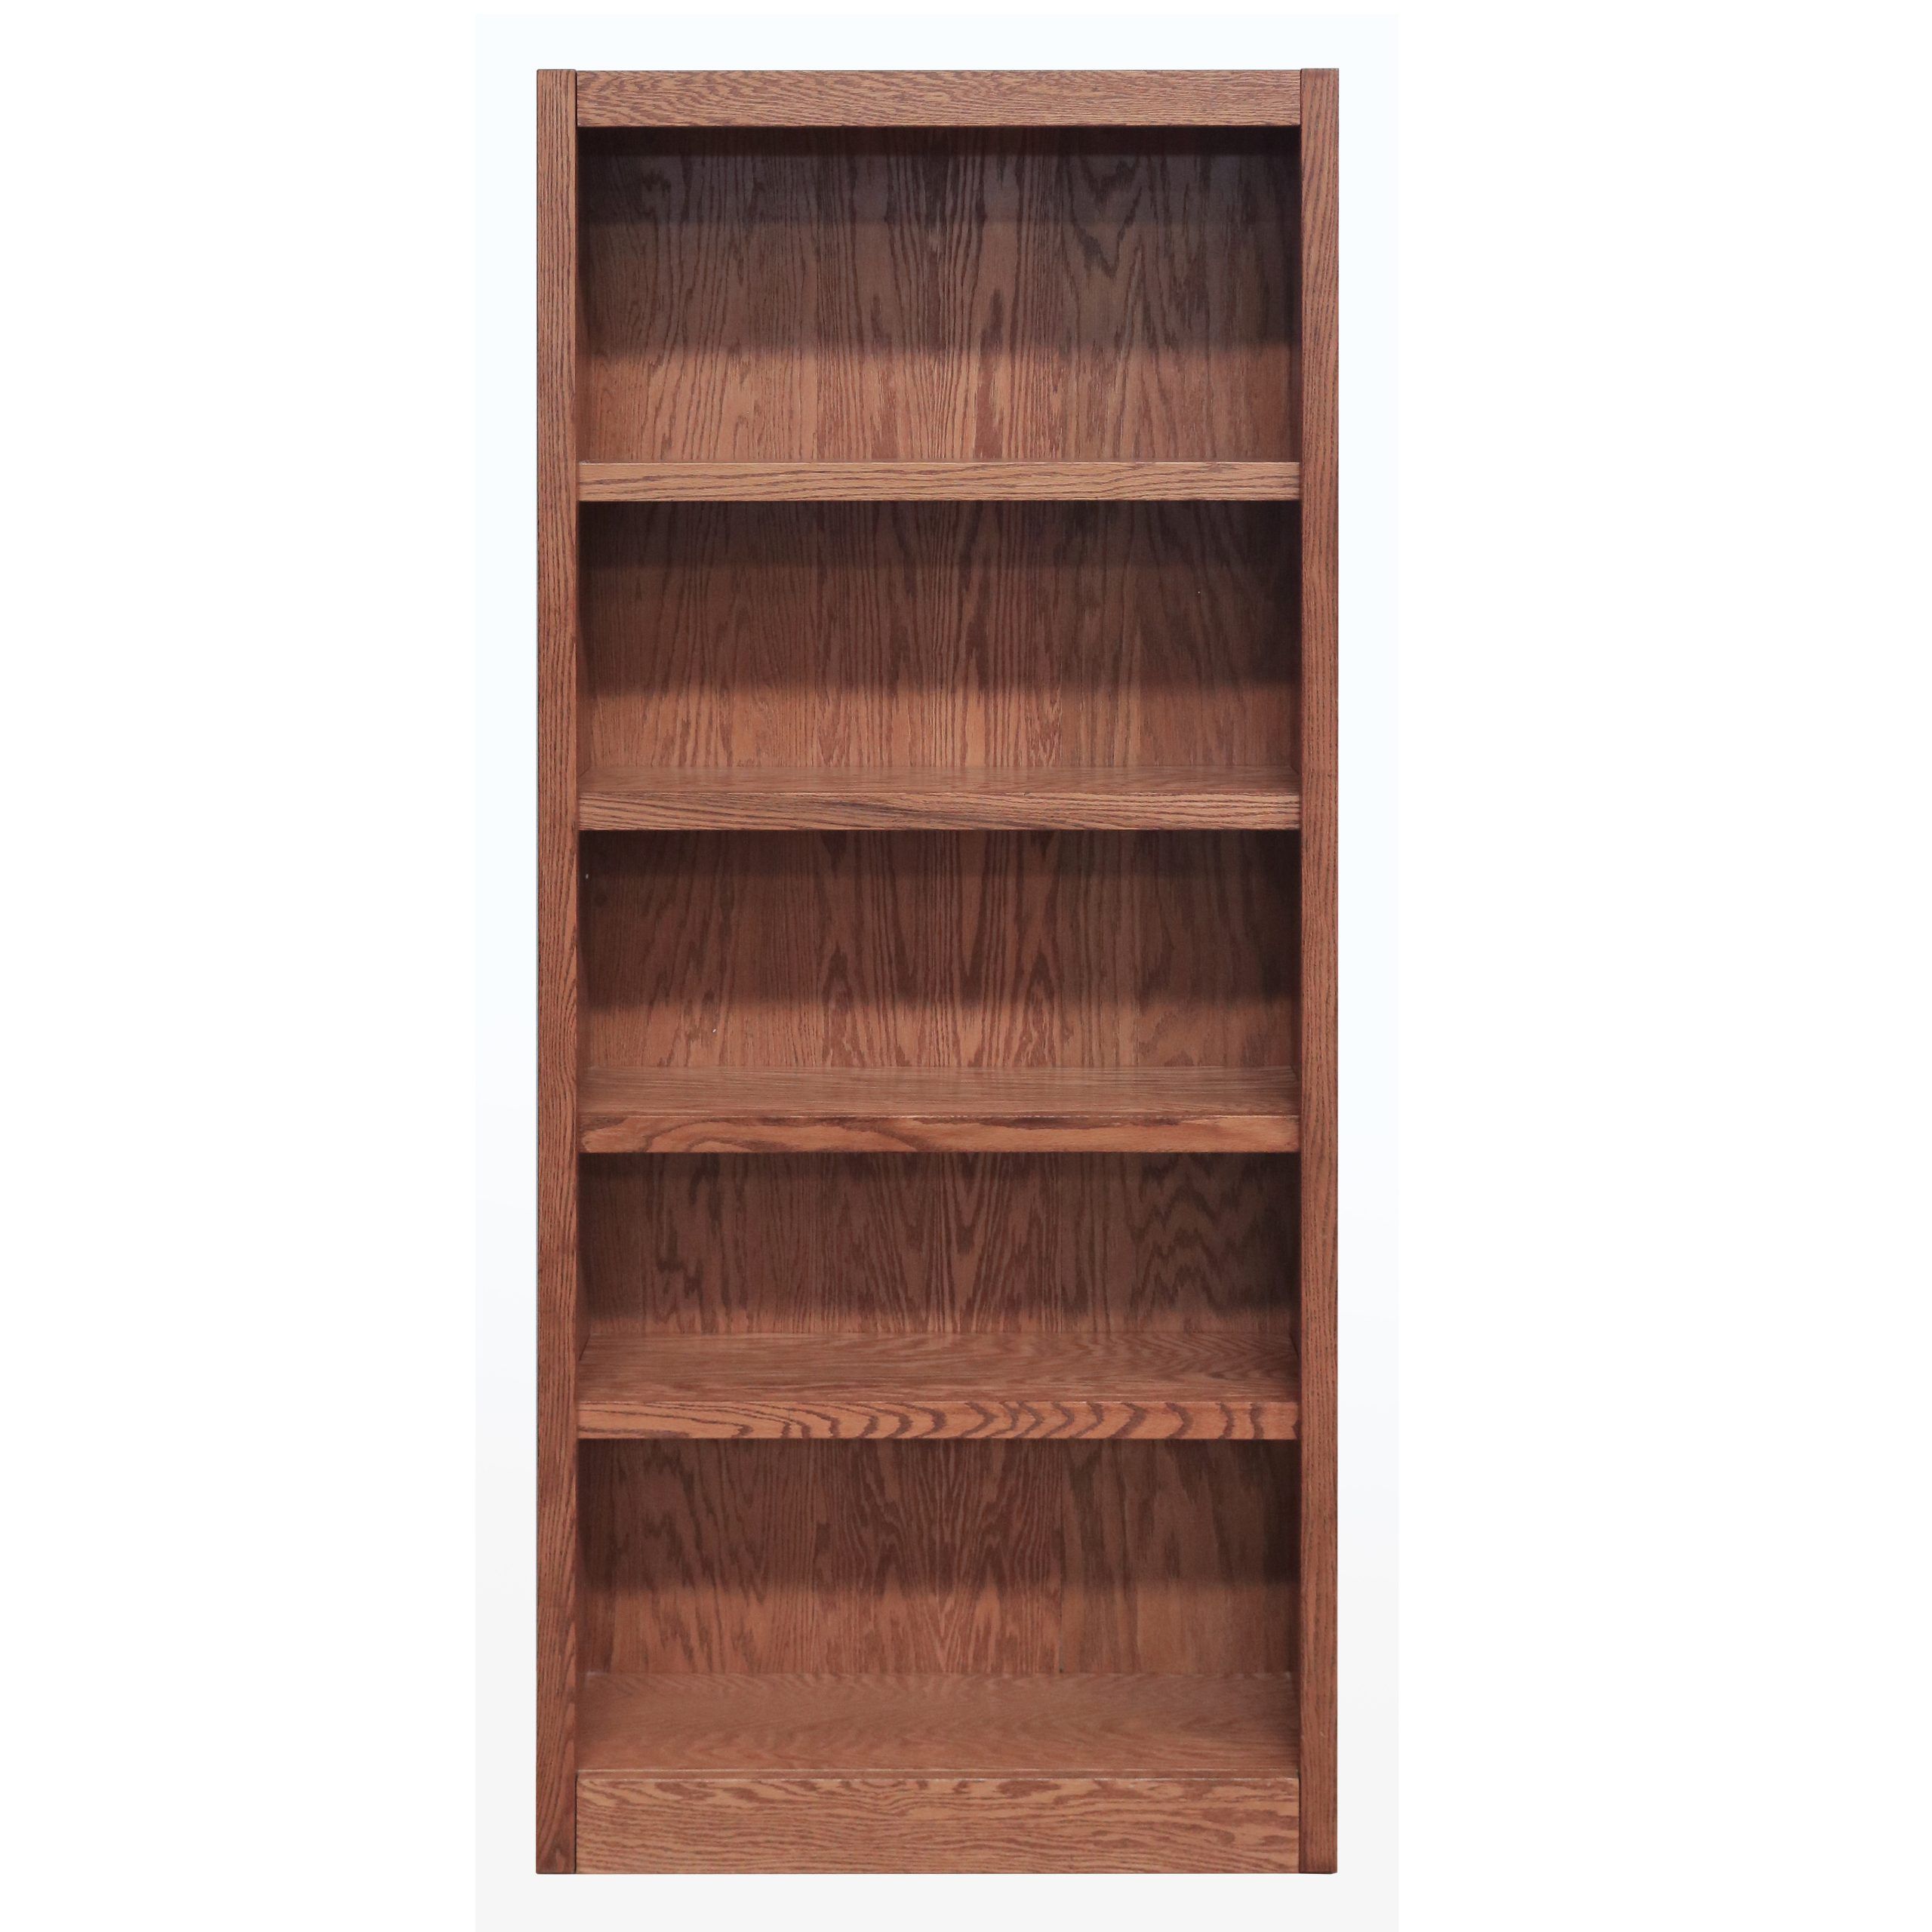 Concepts In Wood 5 Shelf Wood Bookcase, 72 Inch Tall – Espresso Finish –  Walmart Pertaining To 72 Inch Bookcases (View 2 of 15)